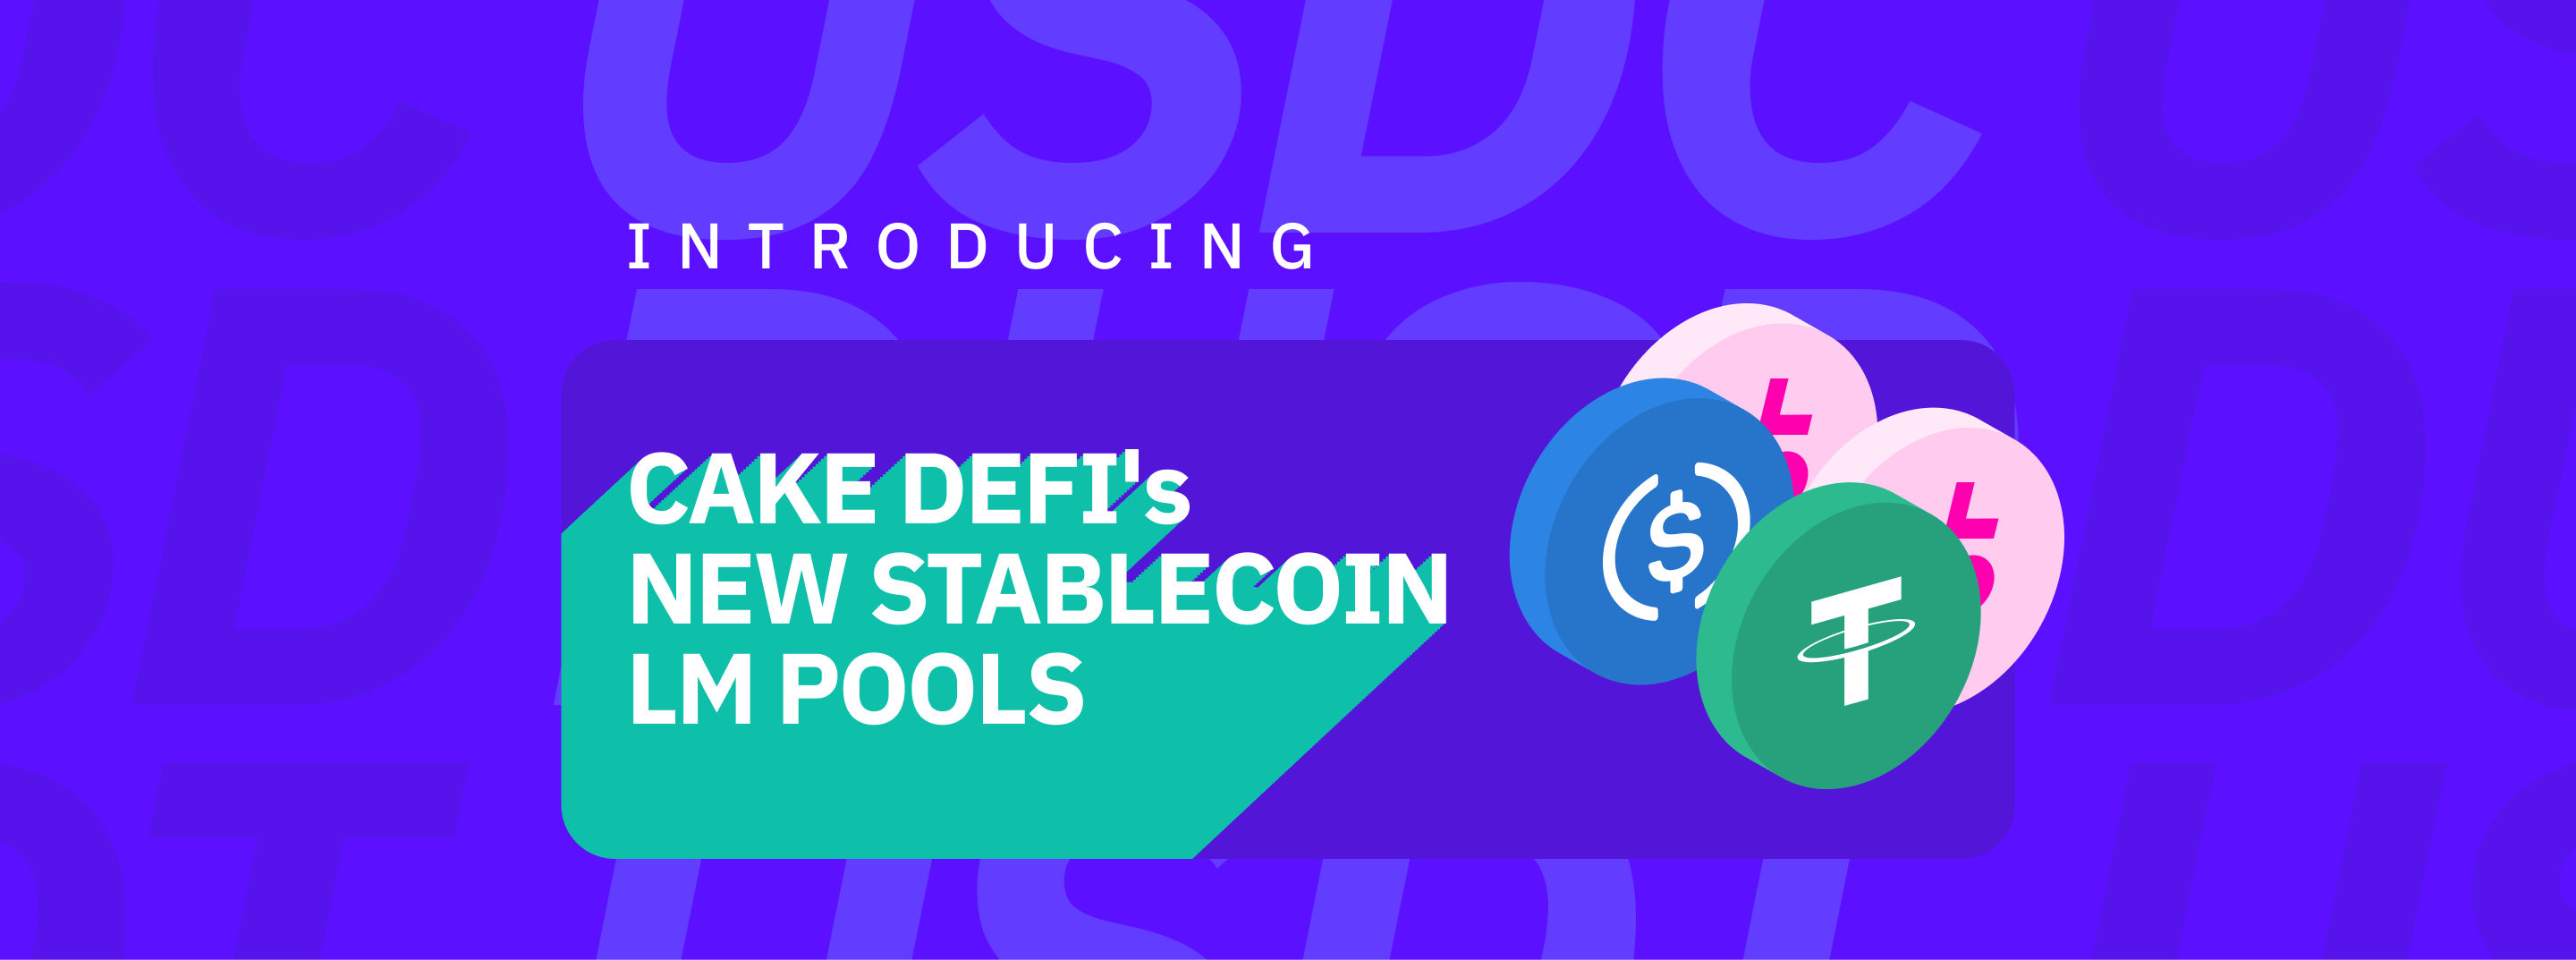 INTRODUCING CAKE DEFI's NEW LM POOLS - Allocate funds now and earn rewards at around 30% APR